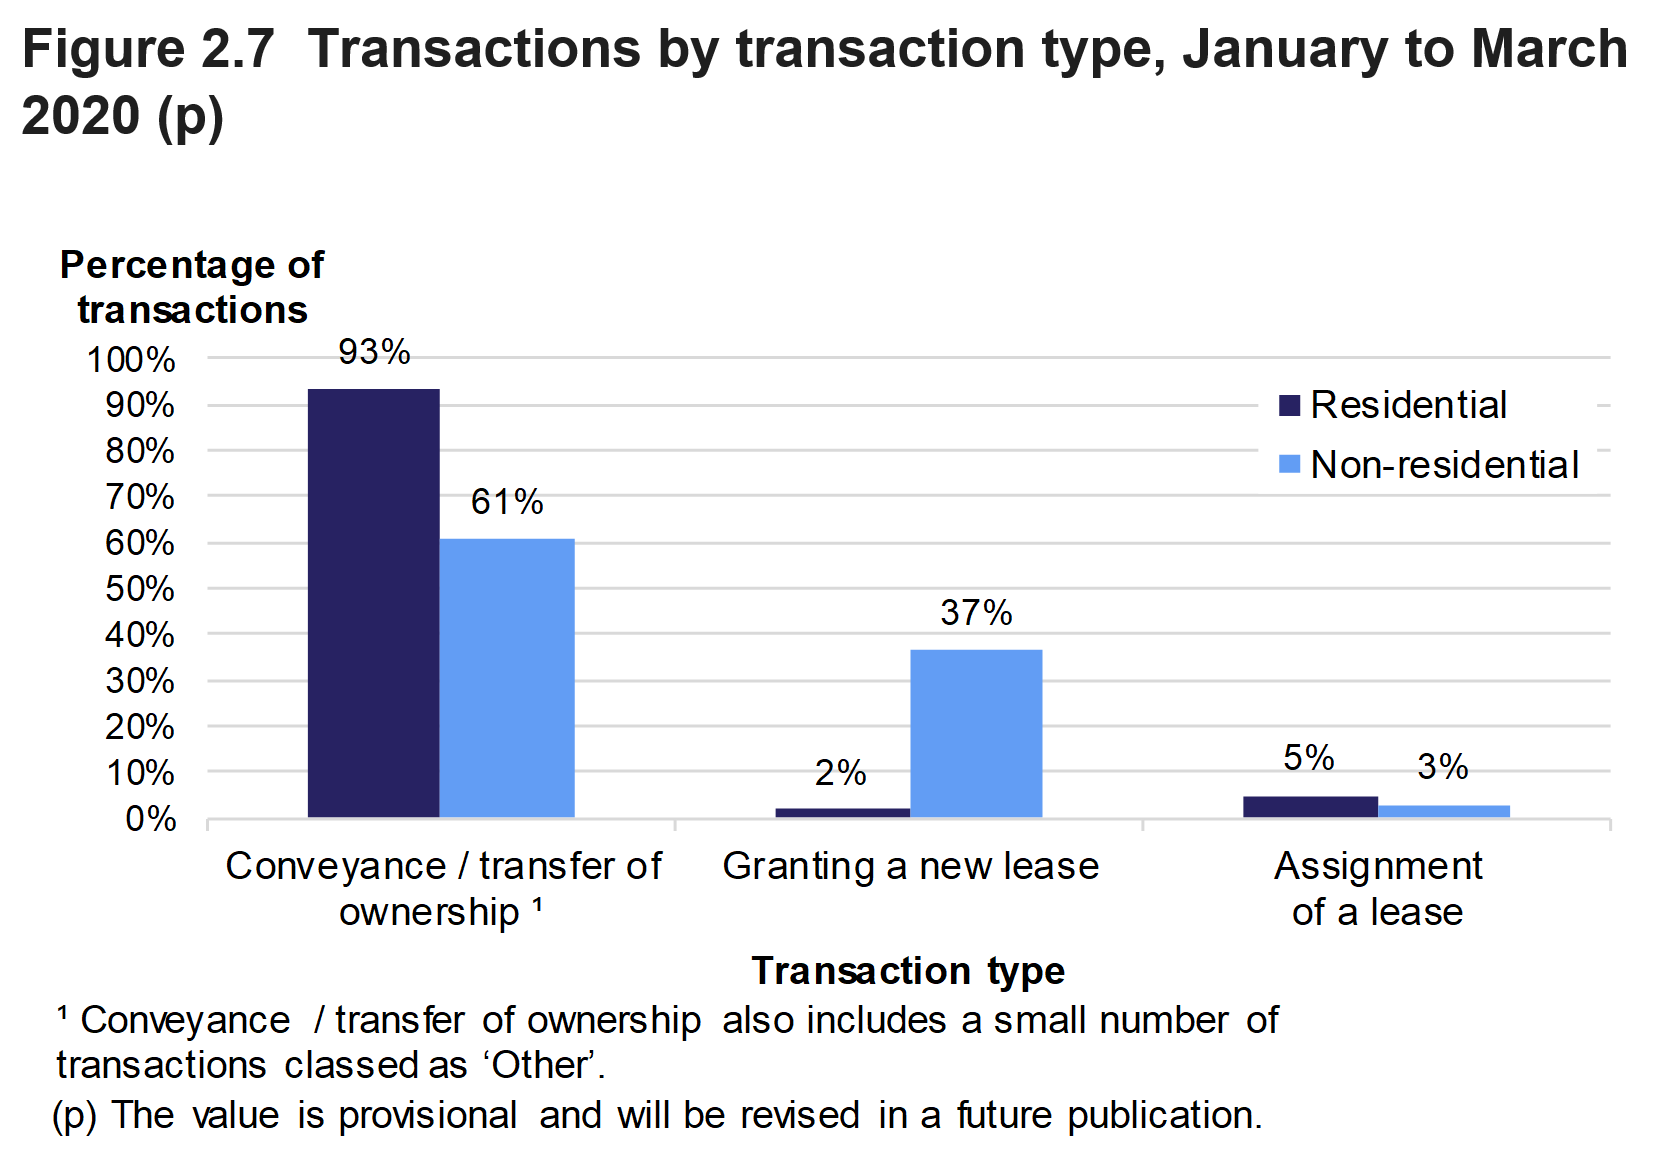 Figure 2.7 shows the percentage of transactions involving conveyance / transfer of ownership, granting of a new lease or assignment of a lease, for January to March 2020. Separate percentages are given for residential and non-residential transactions.